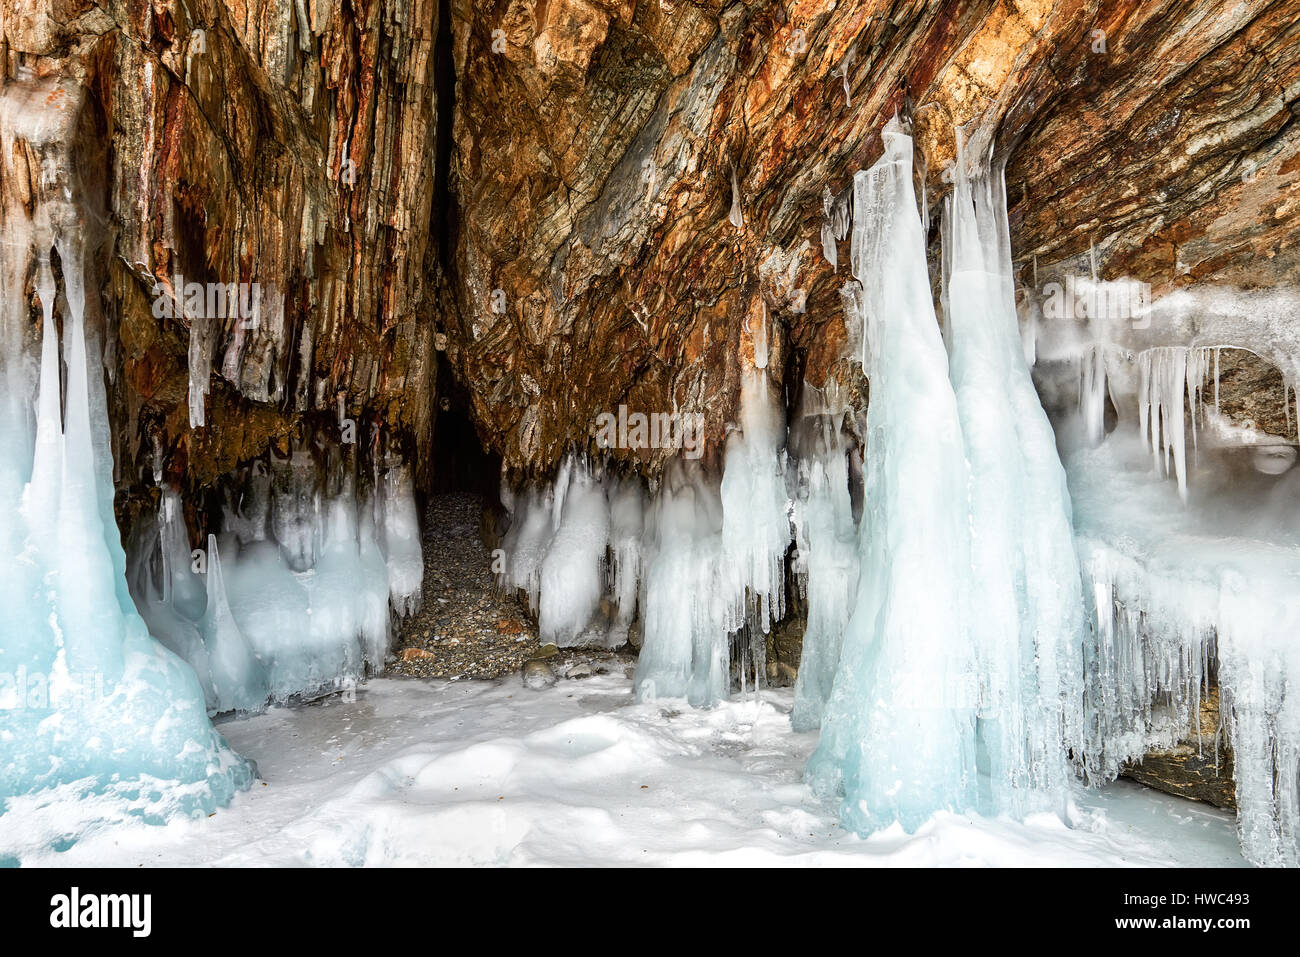 Narrow grotto and splash of ice on rock. Lake Baikal. Northern part of island of Olkhon. Russia Stock Photo